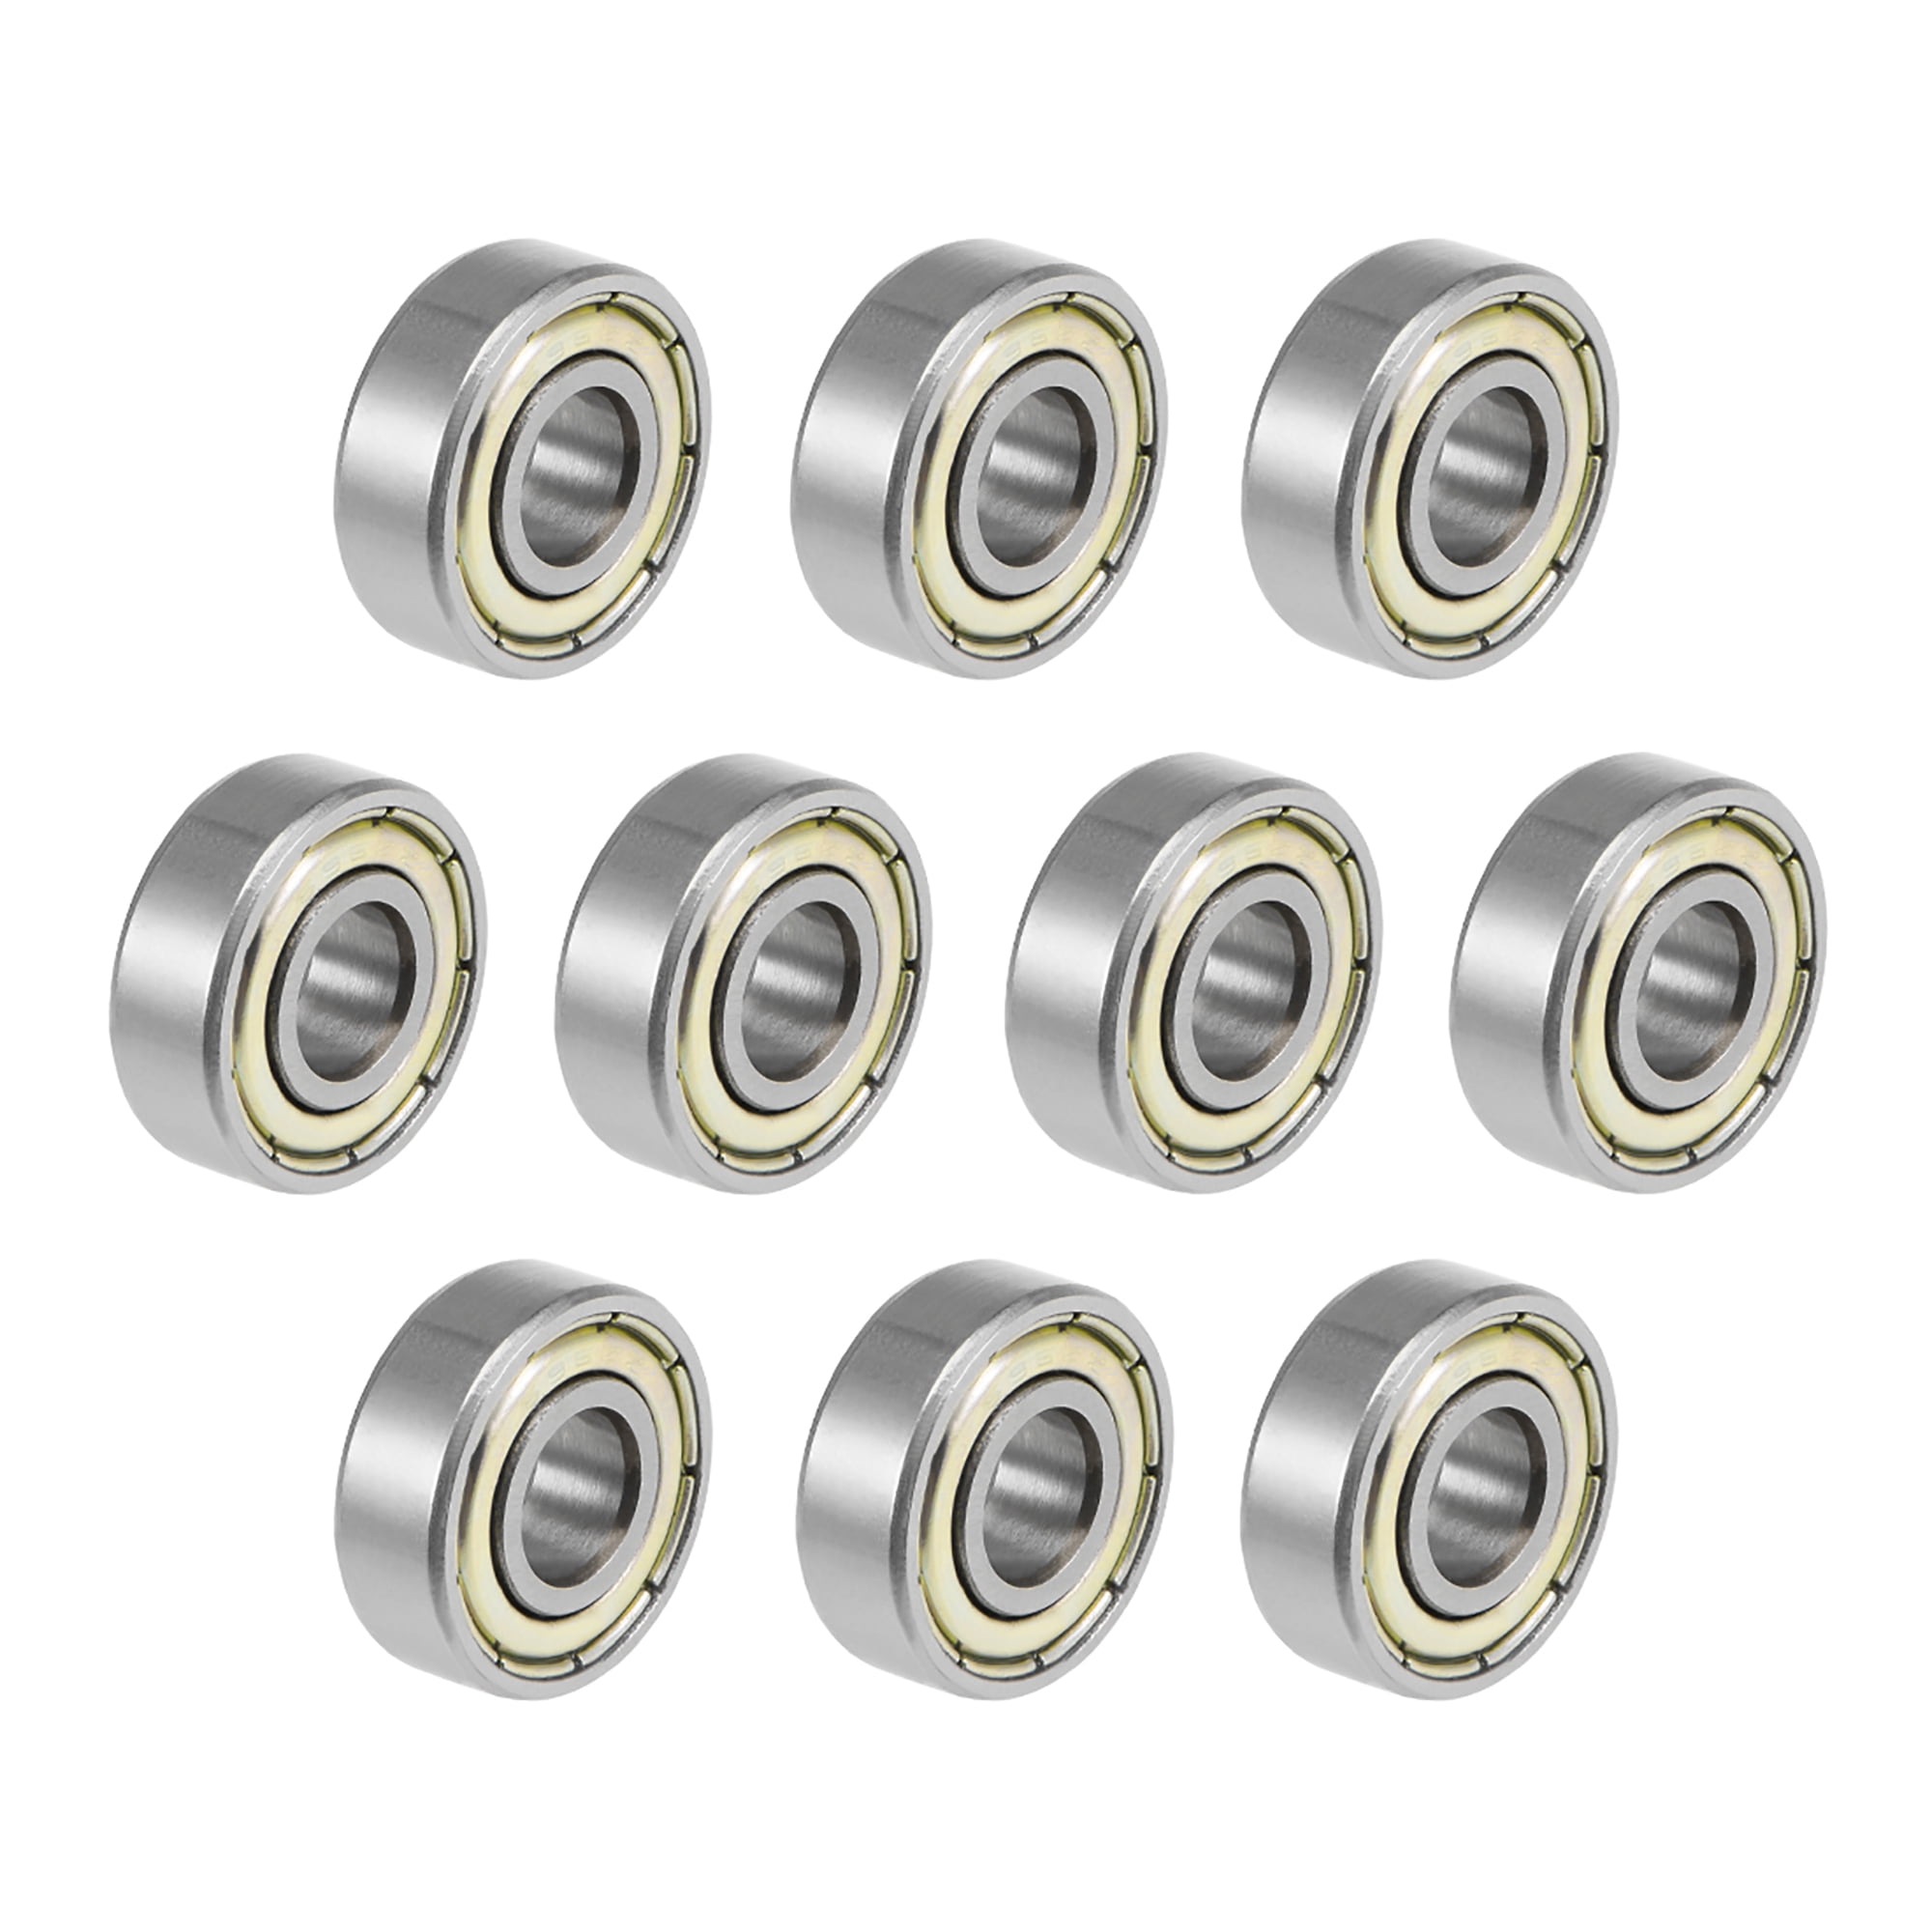 Details about   10pcs ball bearings Ball Bearing Two Rubber Sealed Chrome Skateboard steel new 